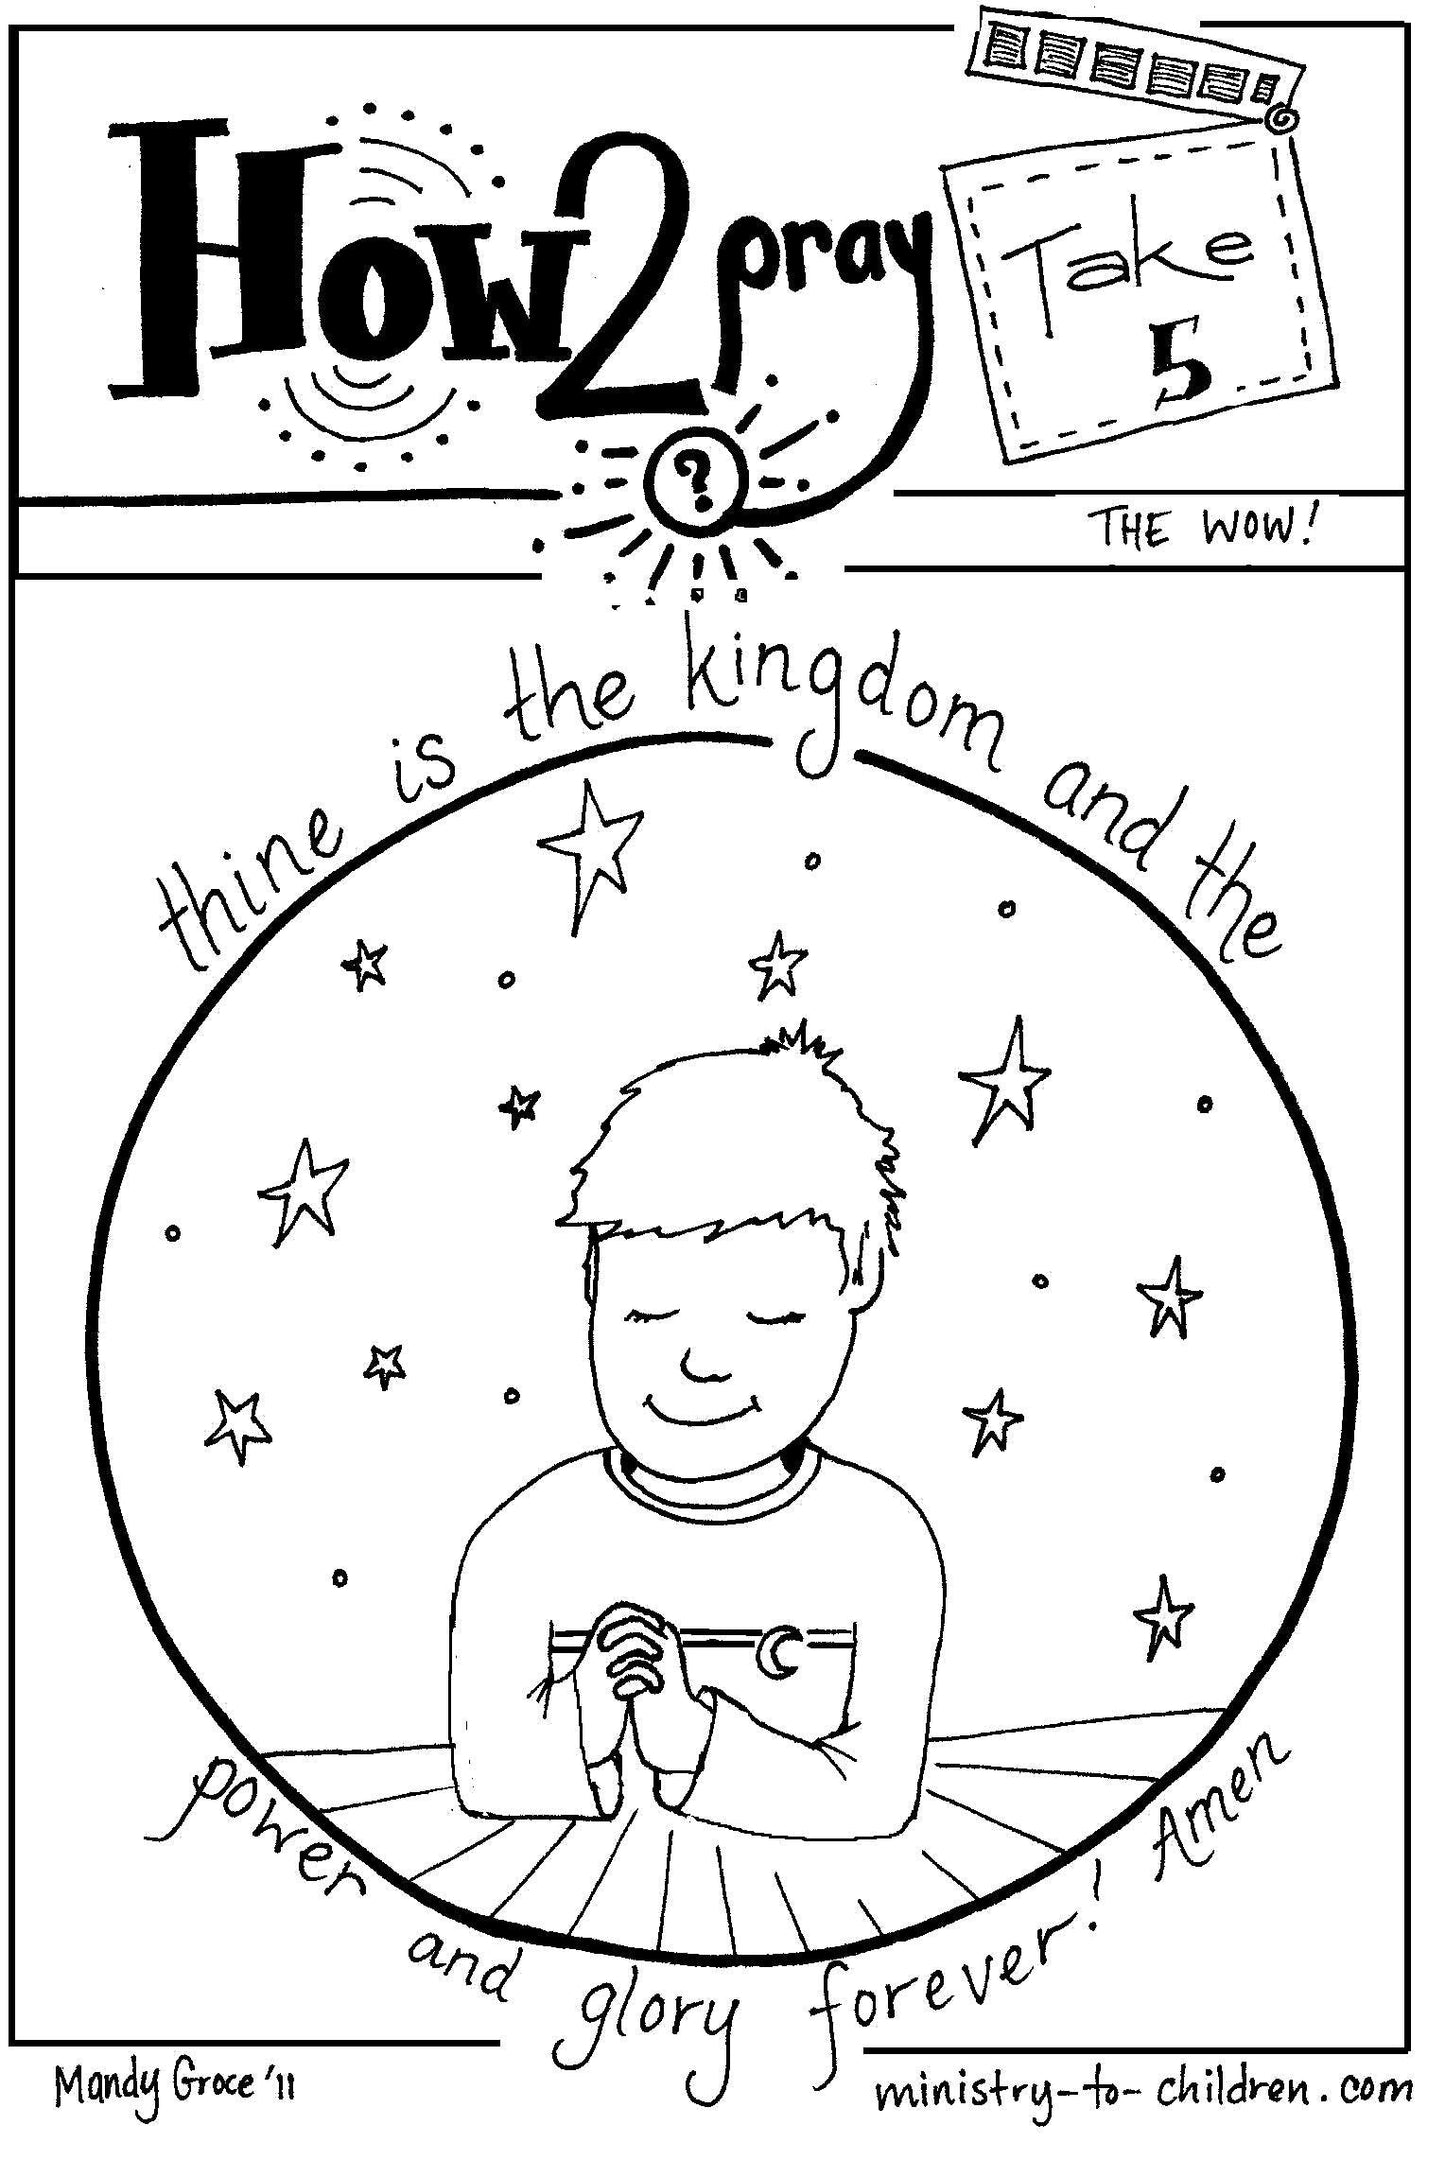 The Lord's Prayer Coloring Book for Kids (FREE) 5 Pages  (download only) - Sunday School Store 